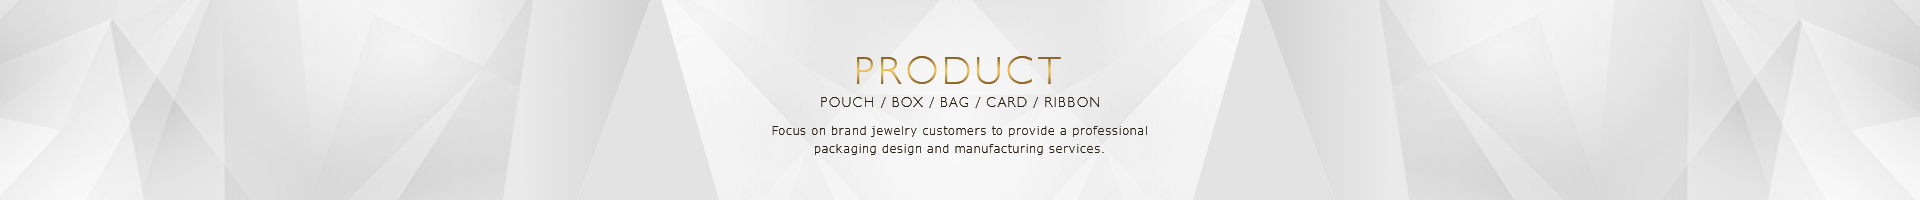 Wholesale high quality jewelry boxes, jewelry box manufacturers - Jewelry boxes